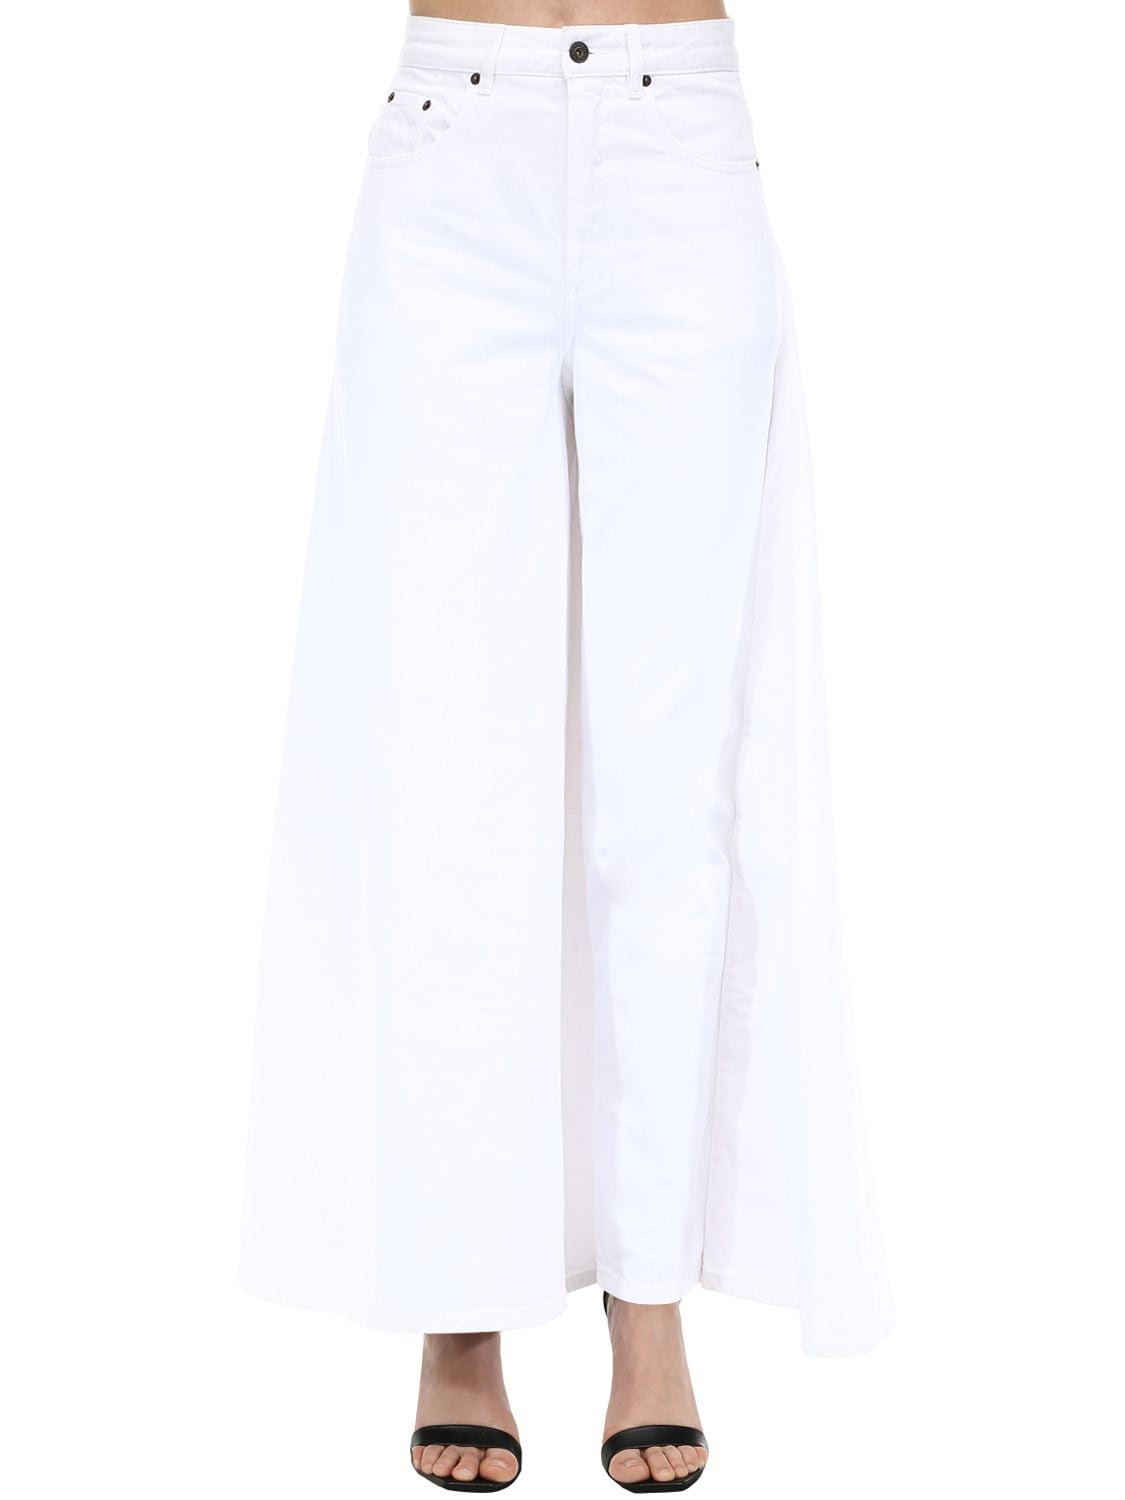 Y/project Cotton Denim Skirt In White